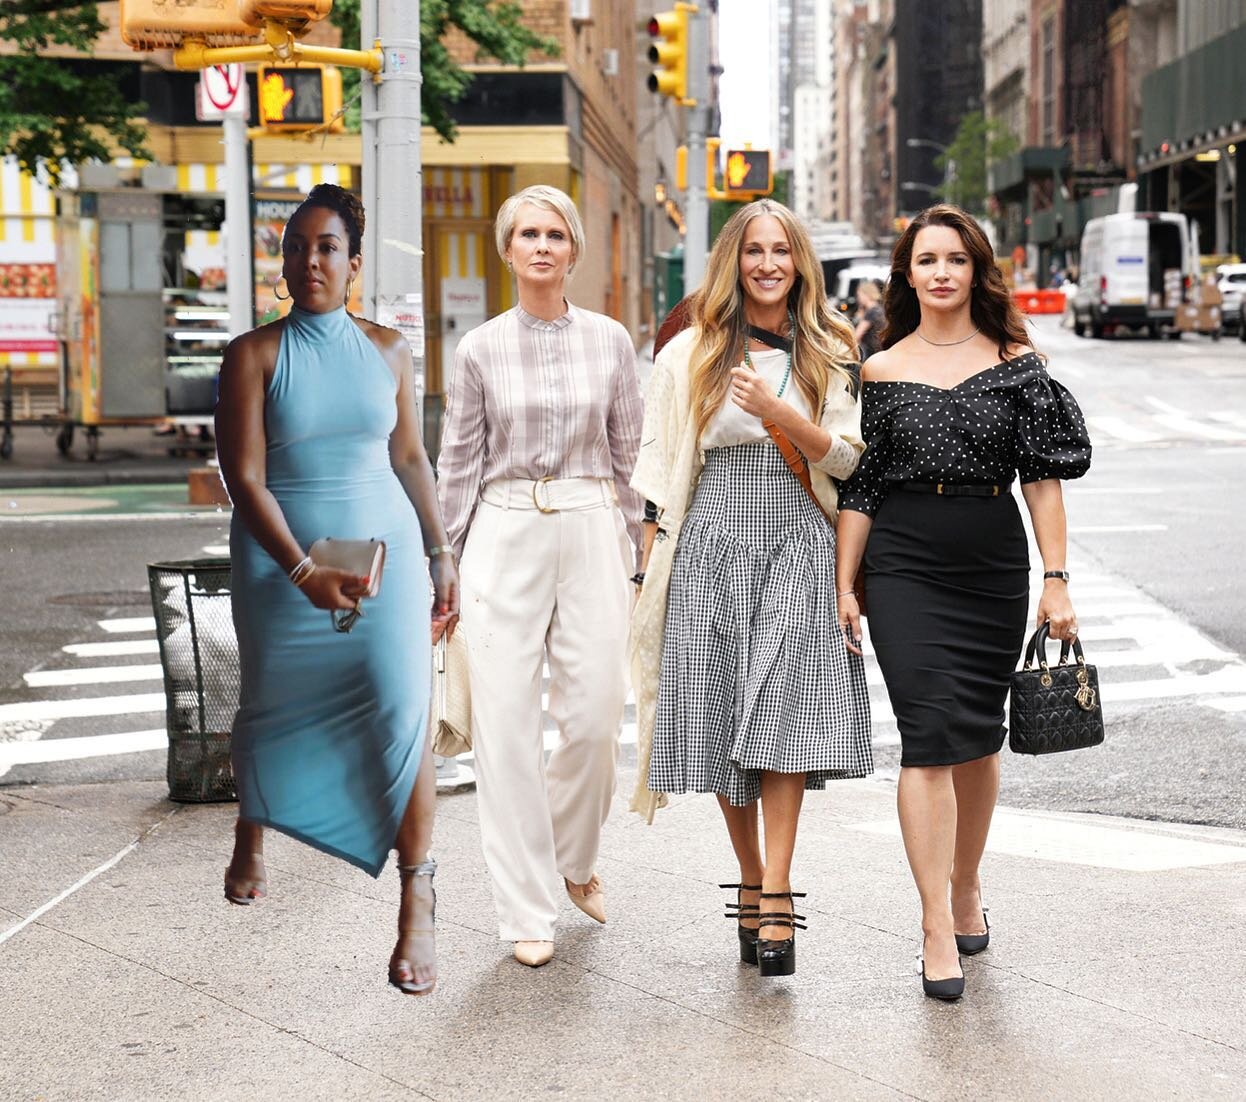 I have been vocal about not being a fan of this SATC reboot/continuation. But, hopefully they will add a lot more diversity this time and I&rsquo;ll volunteer! Go ahead and add me as Samantha Jones&rsquo; long lost daughter, honey! Just don&rsquo;t g